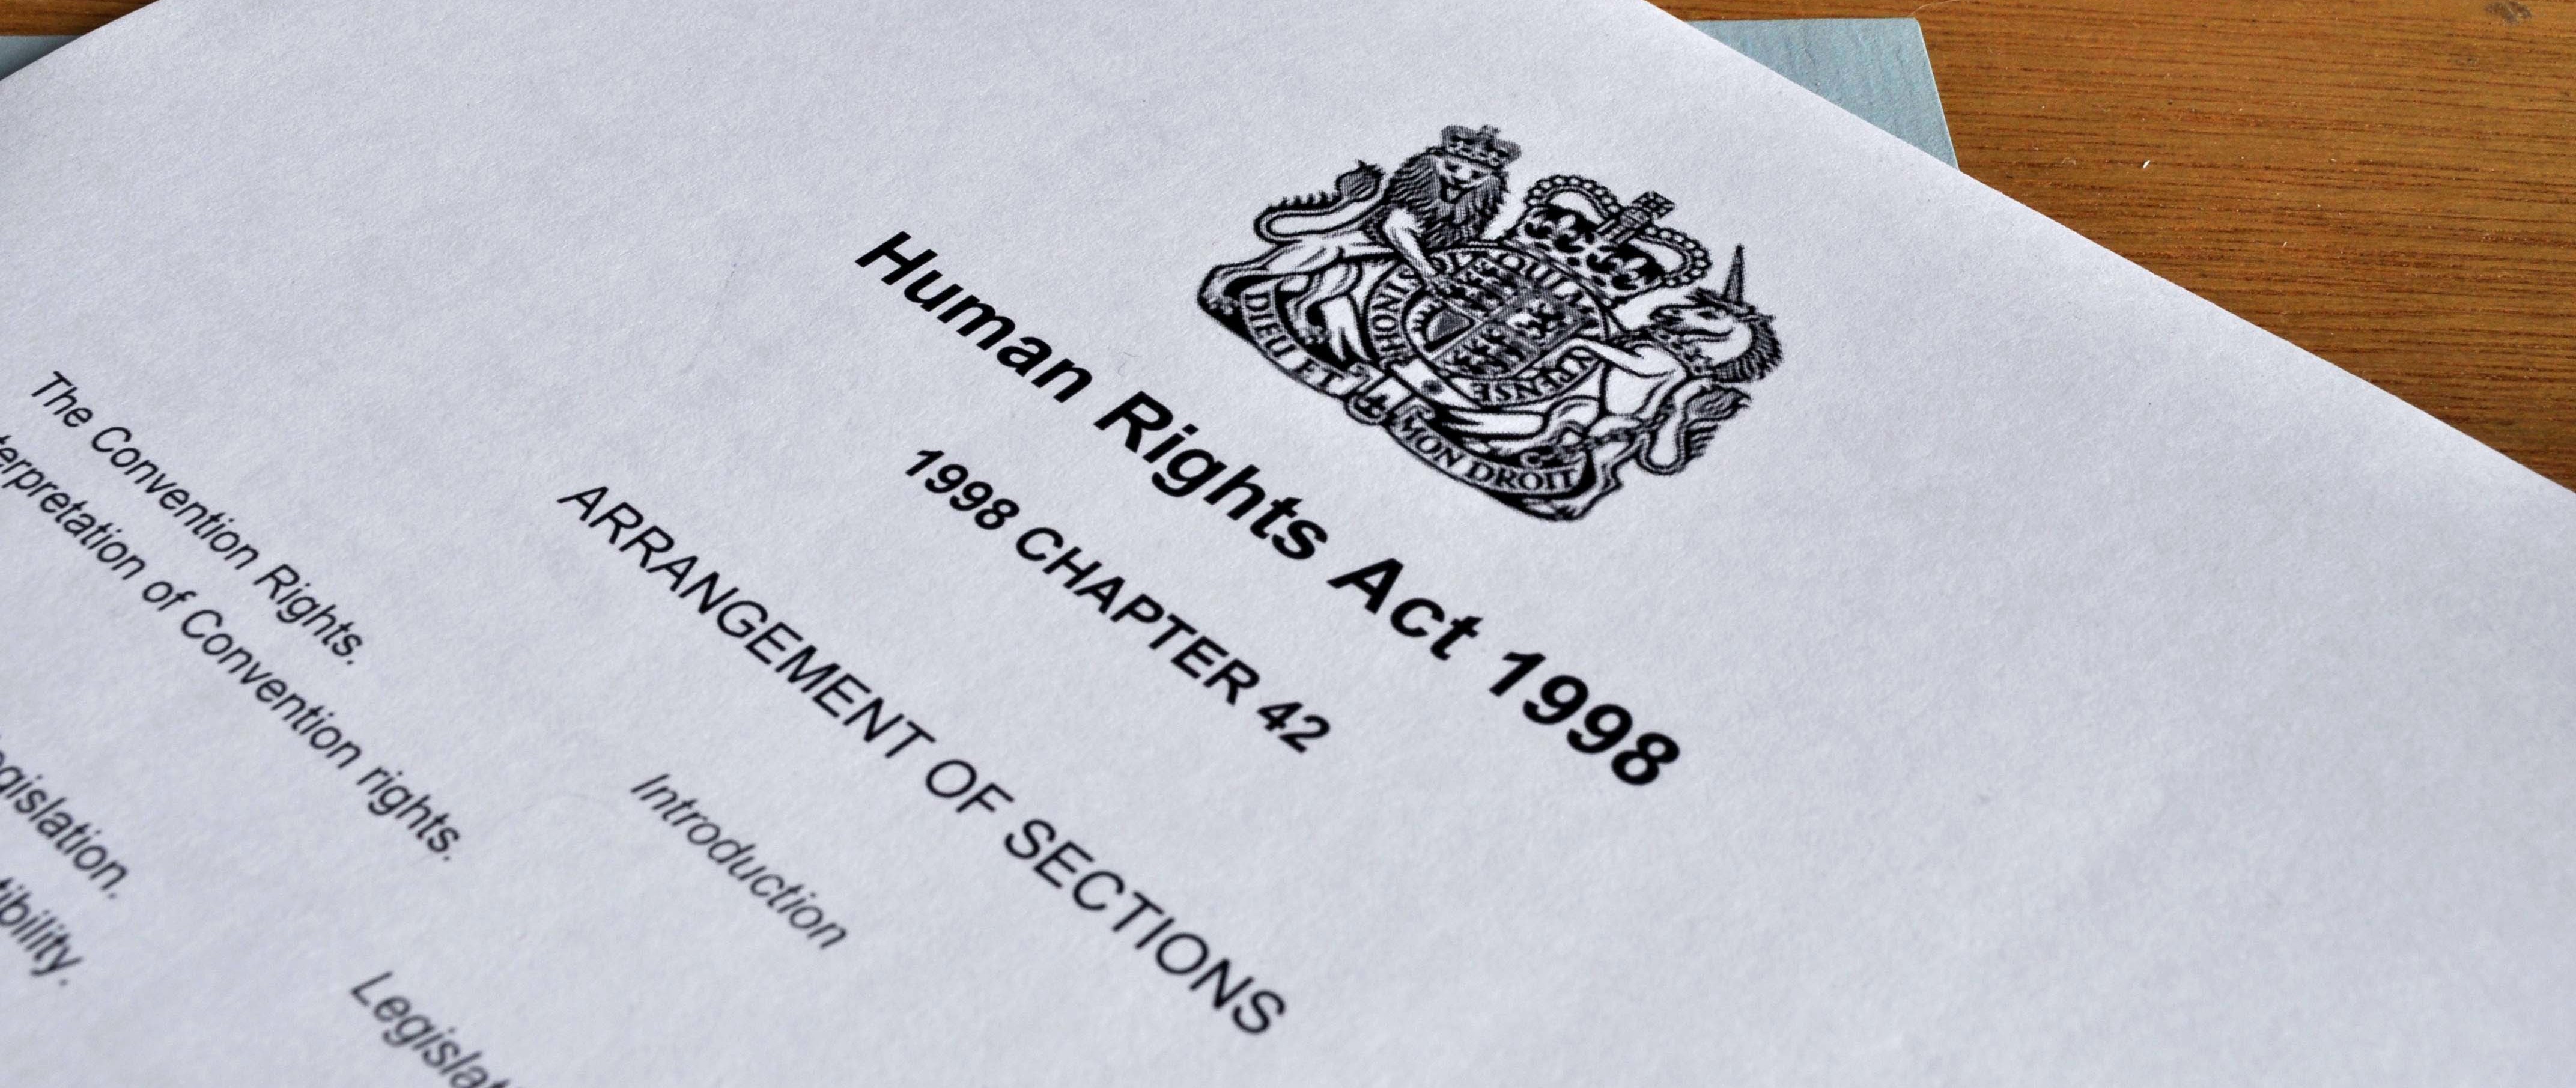 EHRC against repeal of human rights laws